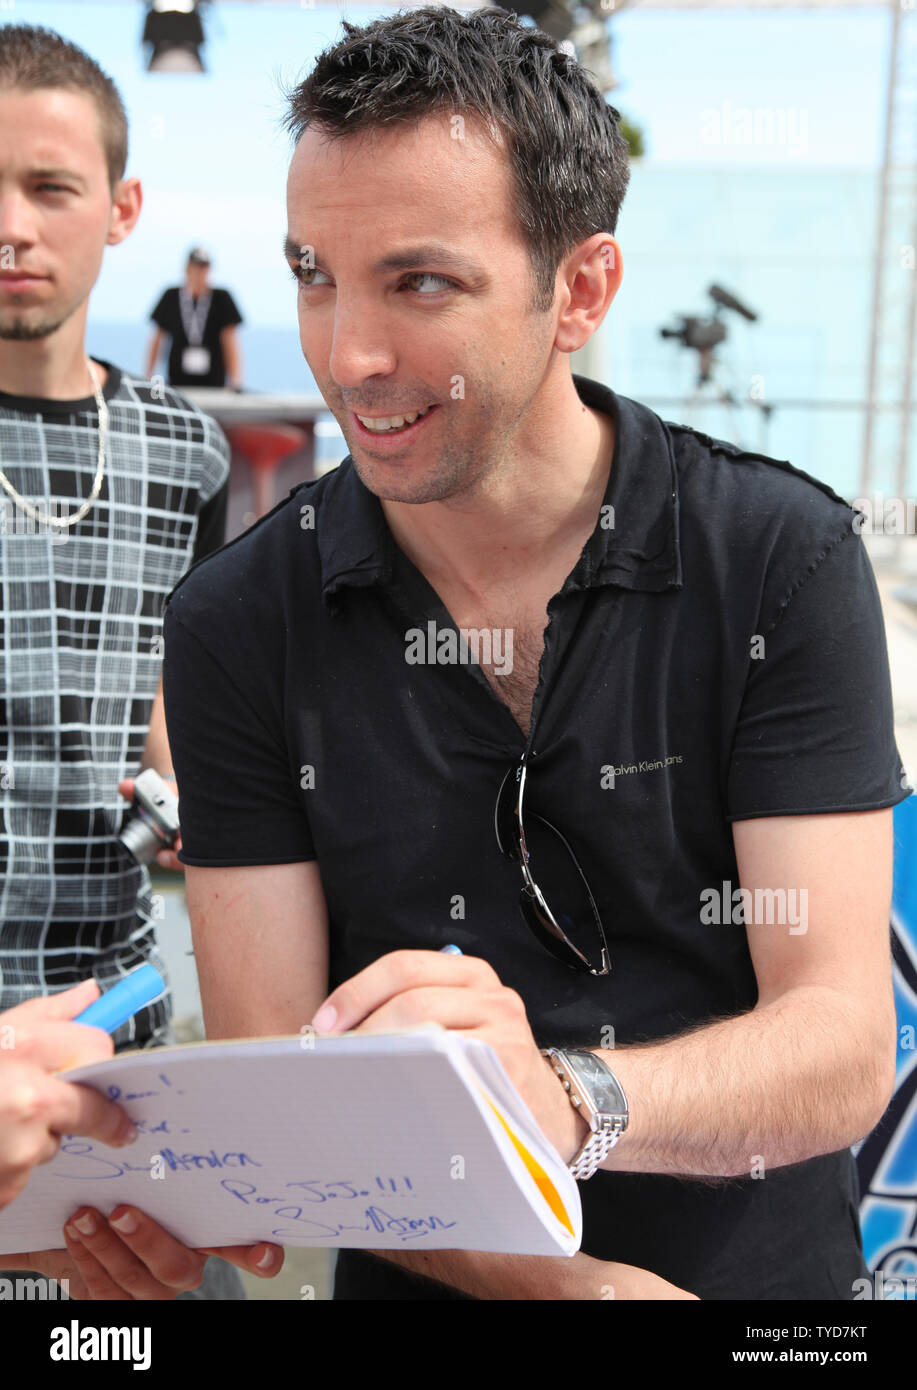 Actor Doudi signs an autograph for a fan during the 49th Monte Carlo Television Festival in Monte Carlo, Monaco on June 9, 2009.  Doudi is at the festival with his television show 'Samantha, Oups ! '.   (UPI Photo/David Silpa) Stock Photo